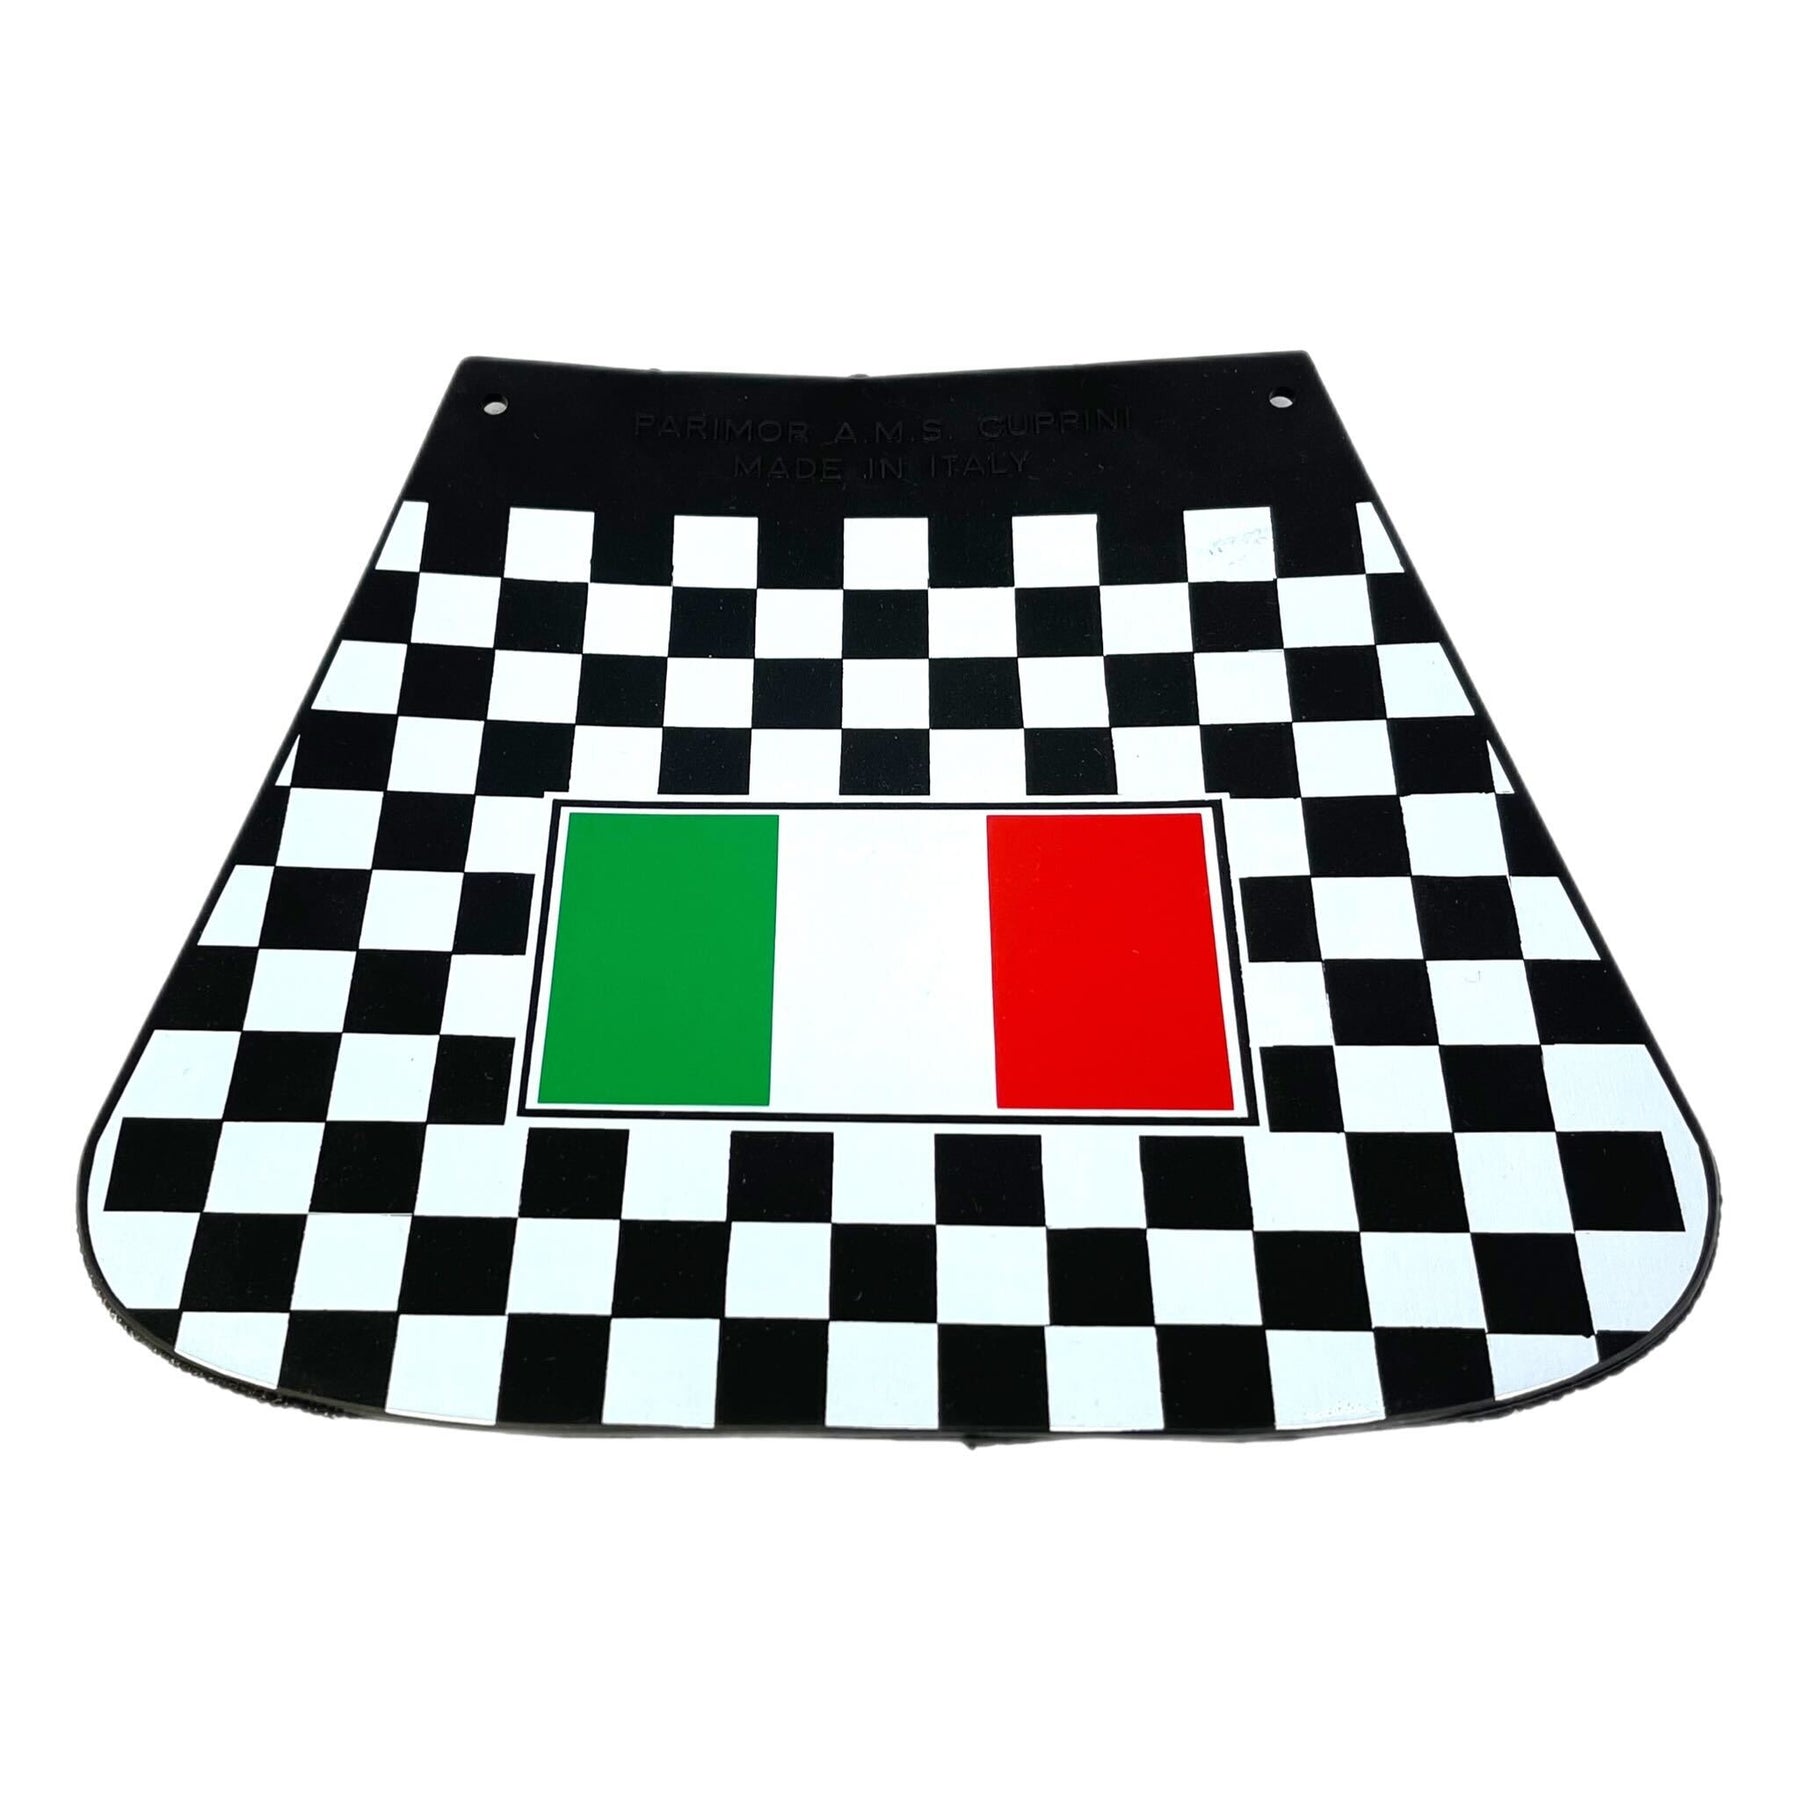 Vespa Lambretta Scooter Royal Alloy Scomadi Chequered Mudflap With Italian Flag Flat Type